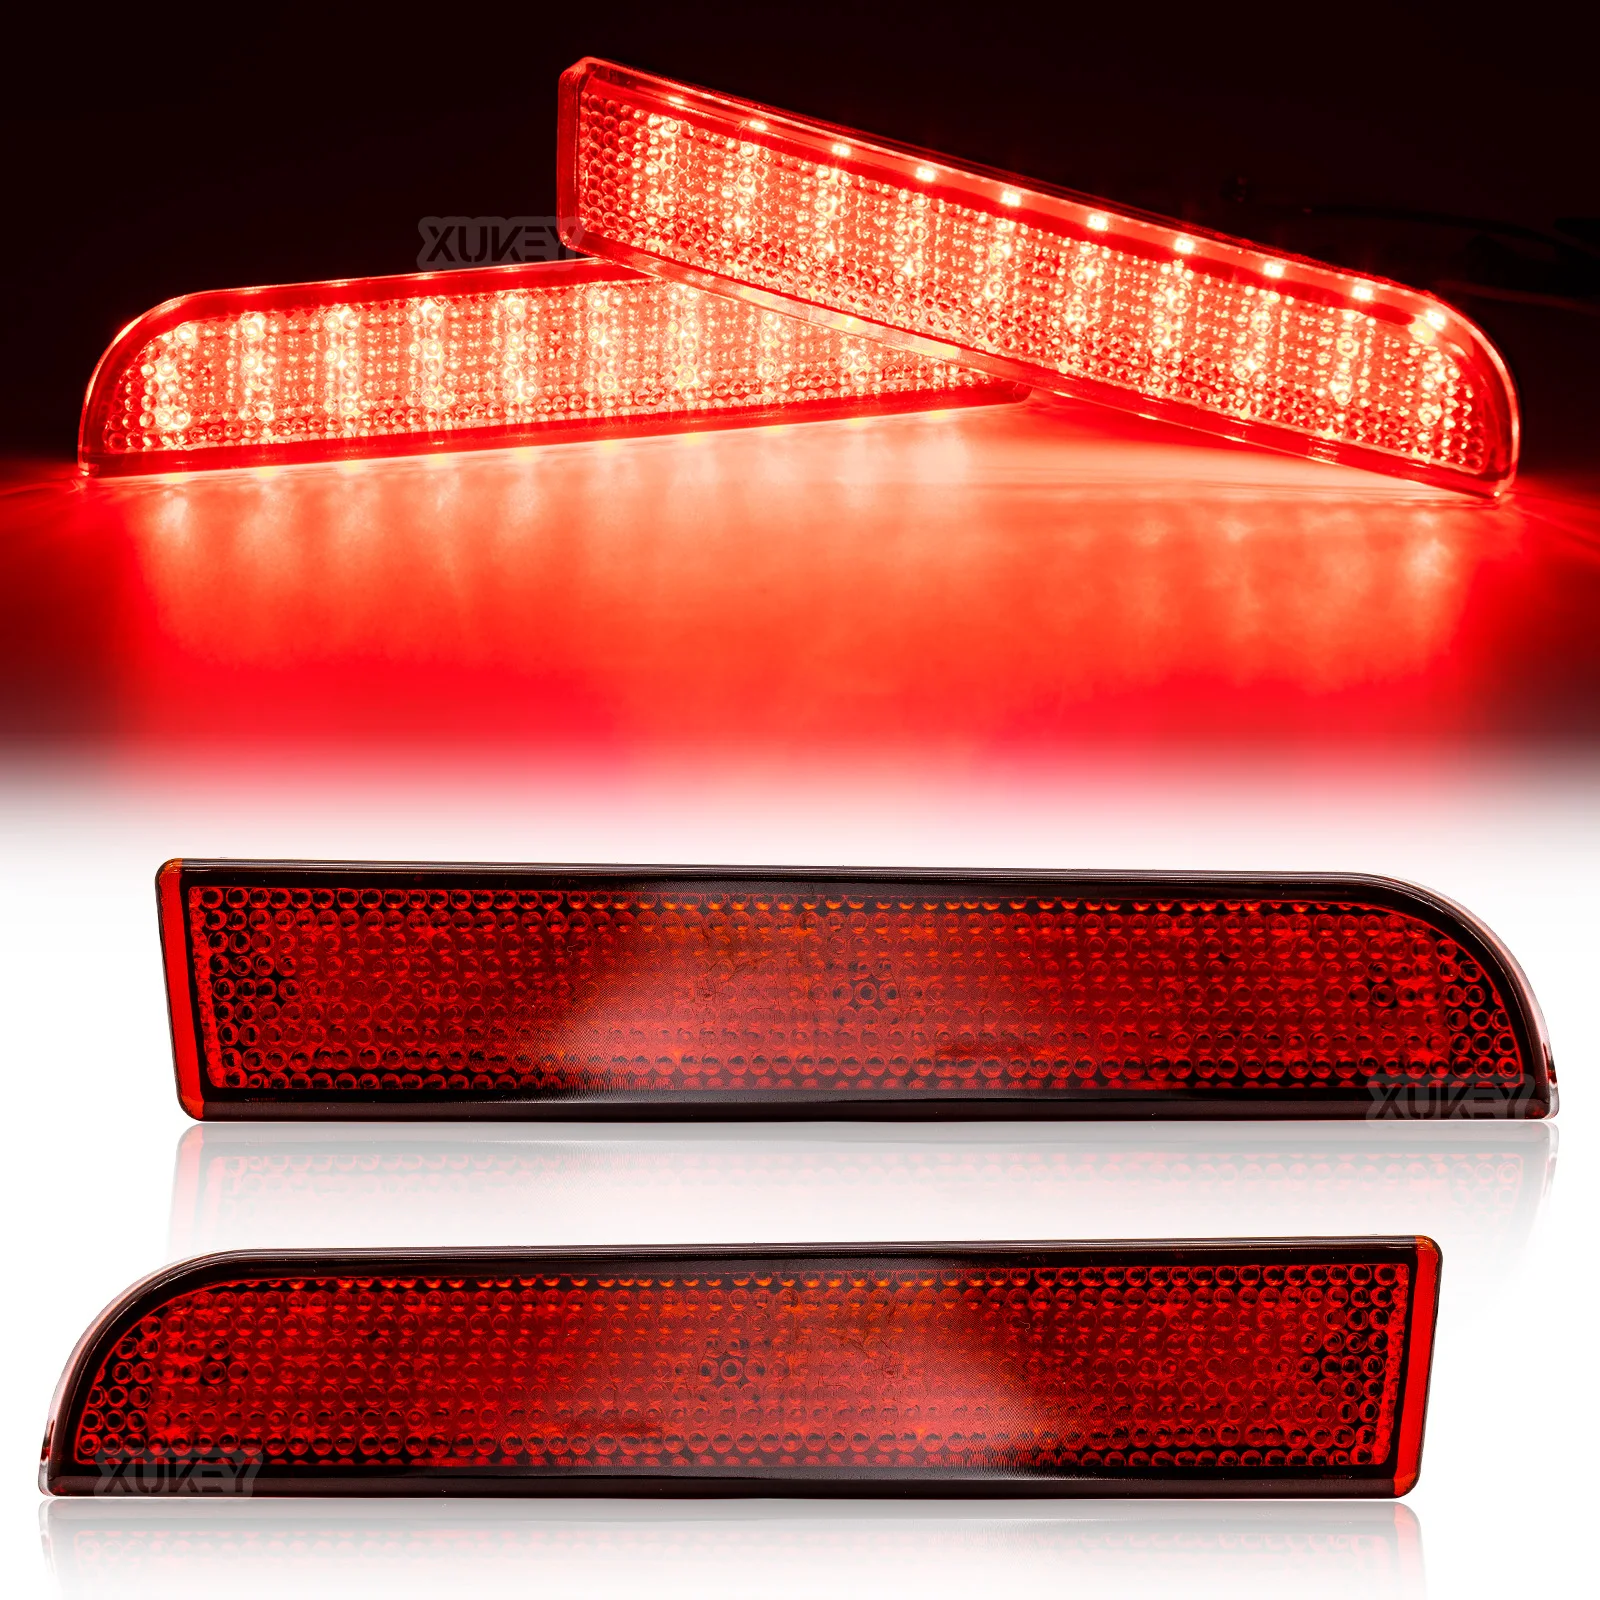 Pair Rear Bumper Reflector Light Signal Stop Tail Squential Brake Fog Light Red LED For Mitsubishi Lancer Evolution X Outlander